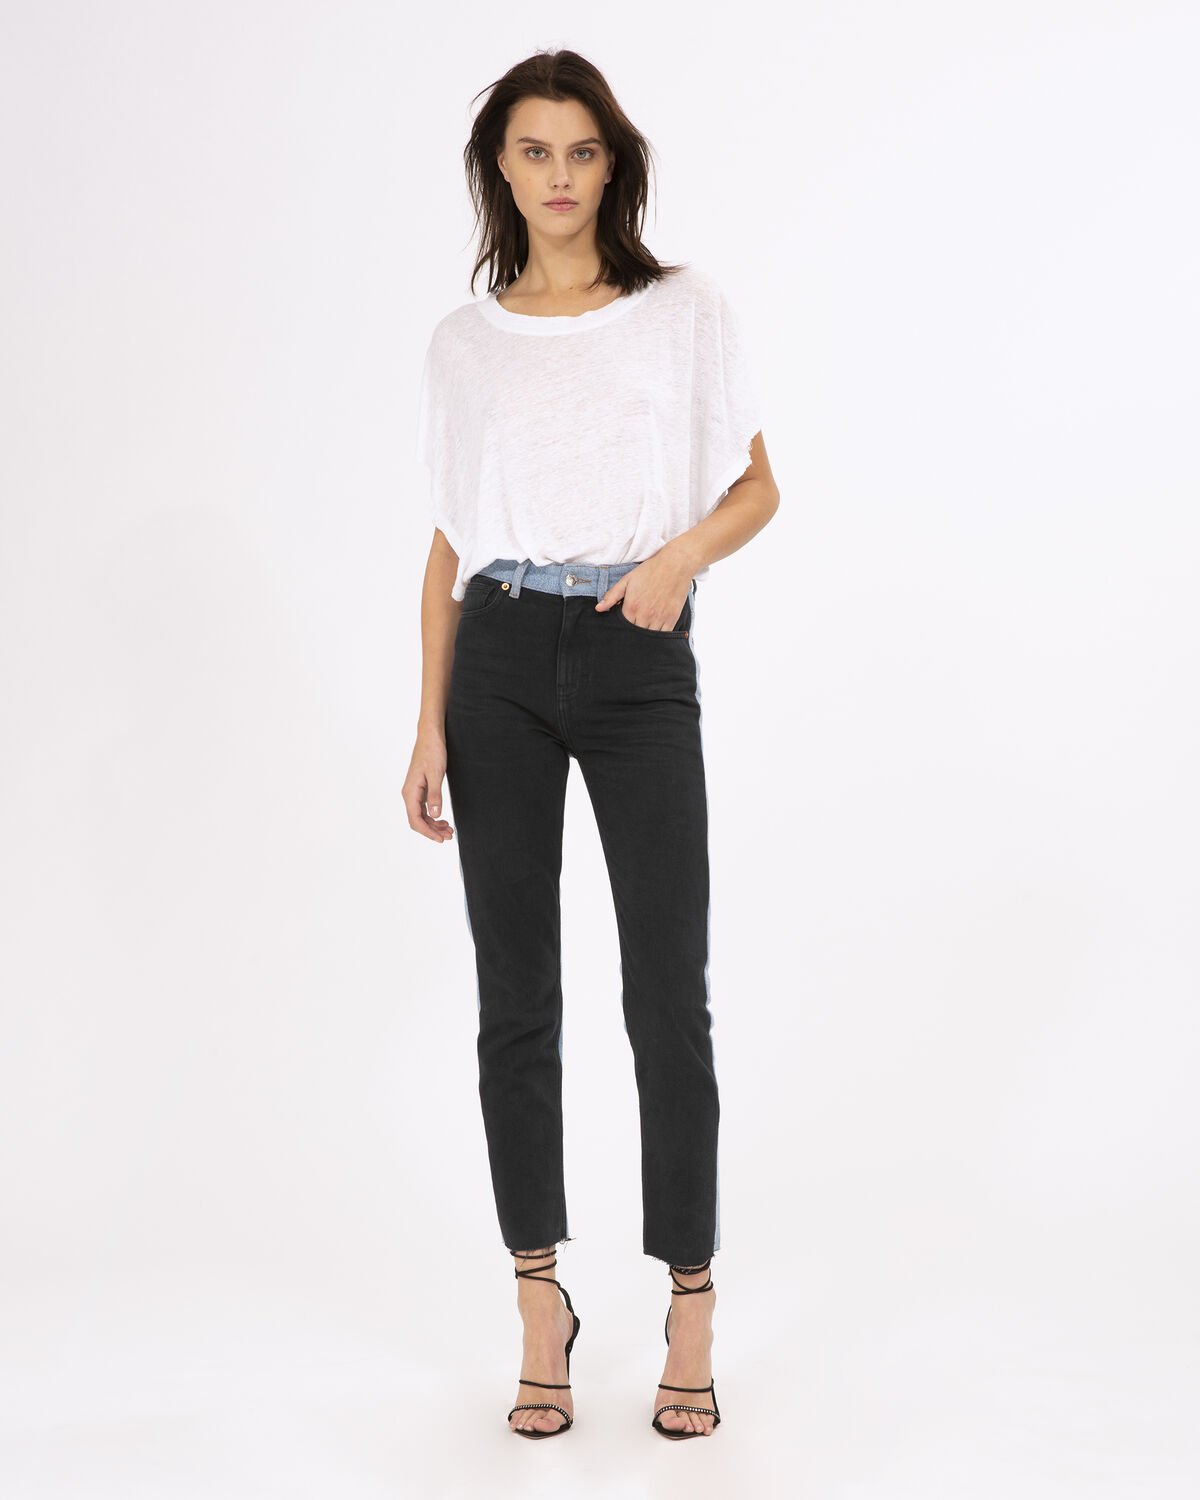 Photo of IRO Paris Reverent Jeans Black And Blue Denim - These Two-tone Slim-cut Jeans Are Characterized By Their High Waist And Will Perfectly Fit Your Curves. Combine Them With An Oversized White T-shirt And A Pair Of Heel Sandals For An Effortless Look. Spring Summer 19